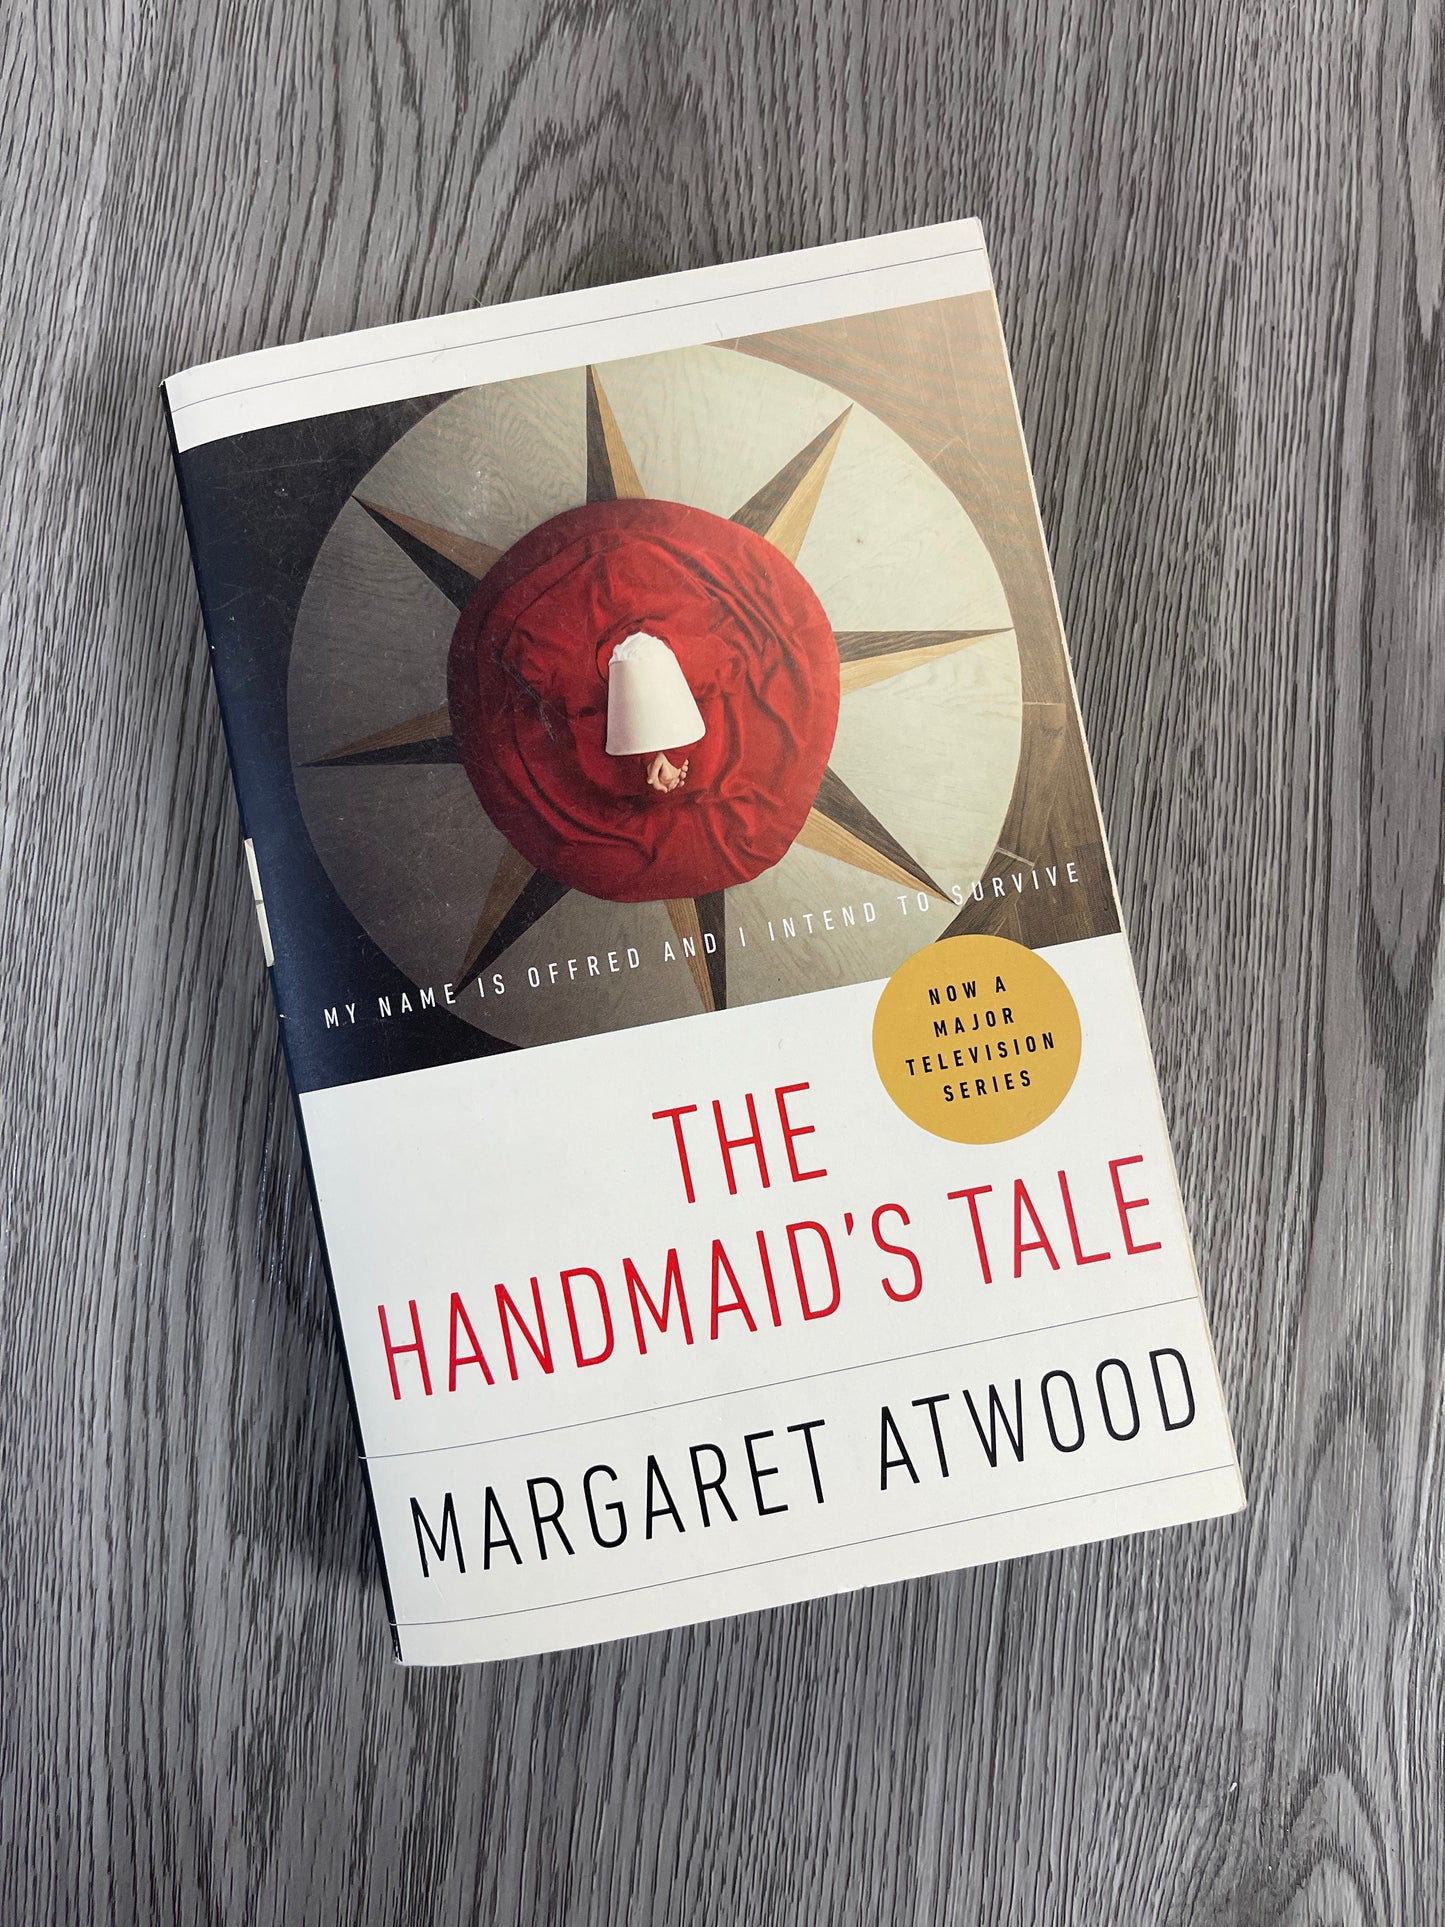 The Handmaids Tale (The Handmaids Tale #1) by Margaret Atwood